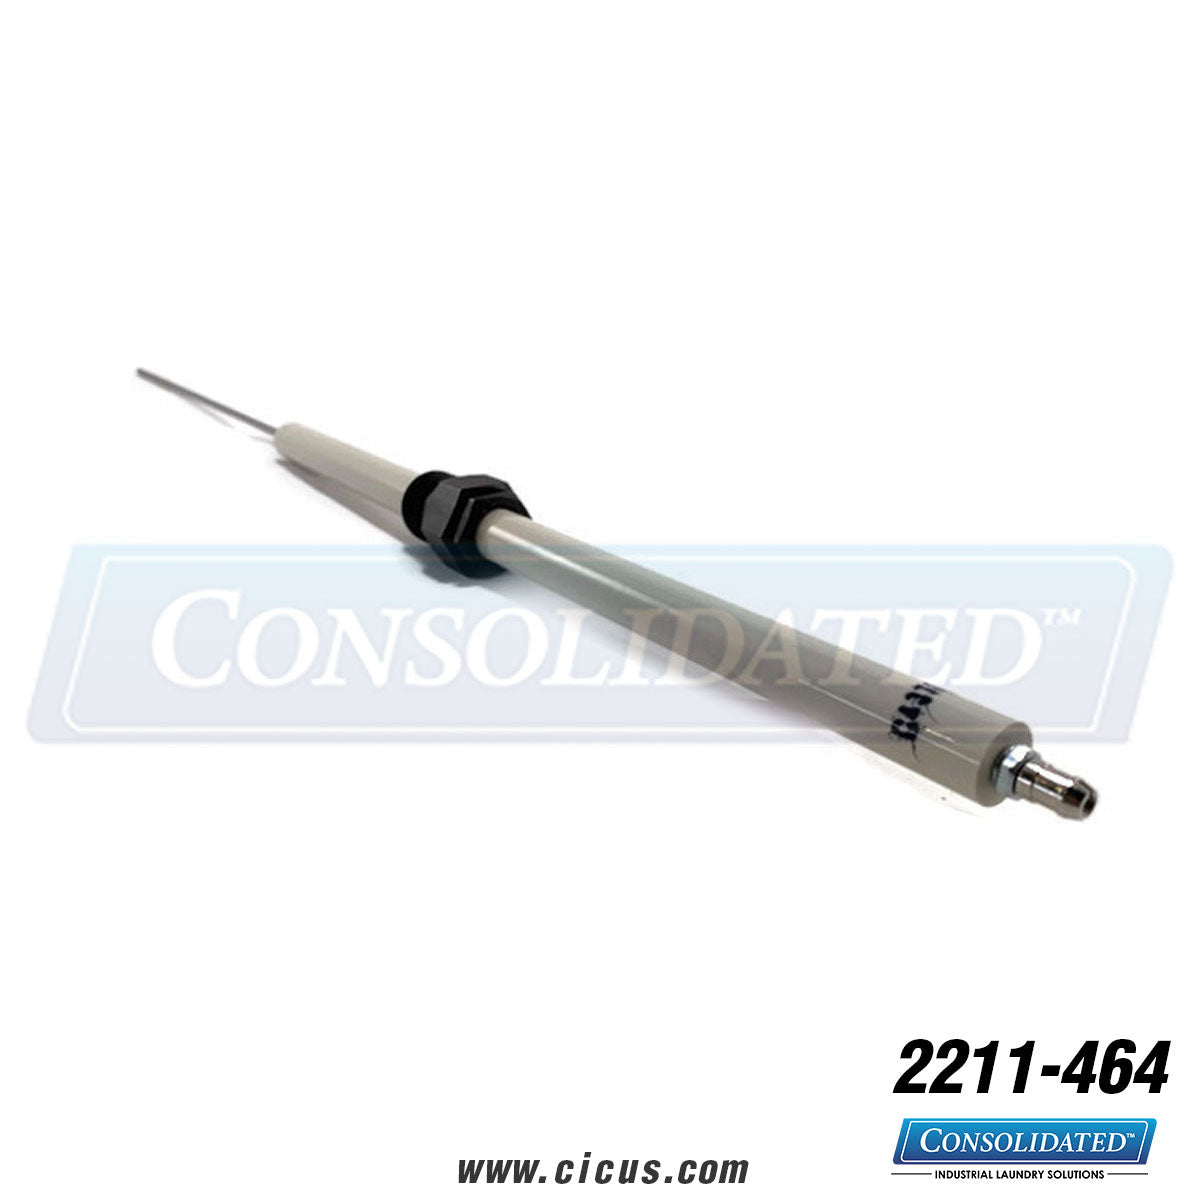 Chicago Dryer Ignition Electrode 1-5-99 [2211-464] - Front View